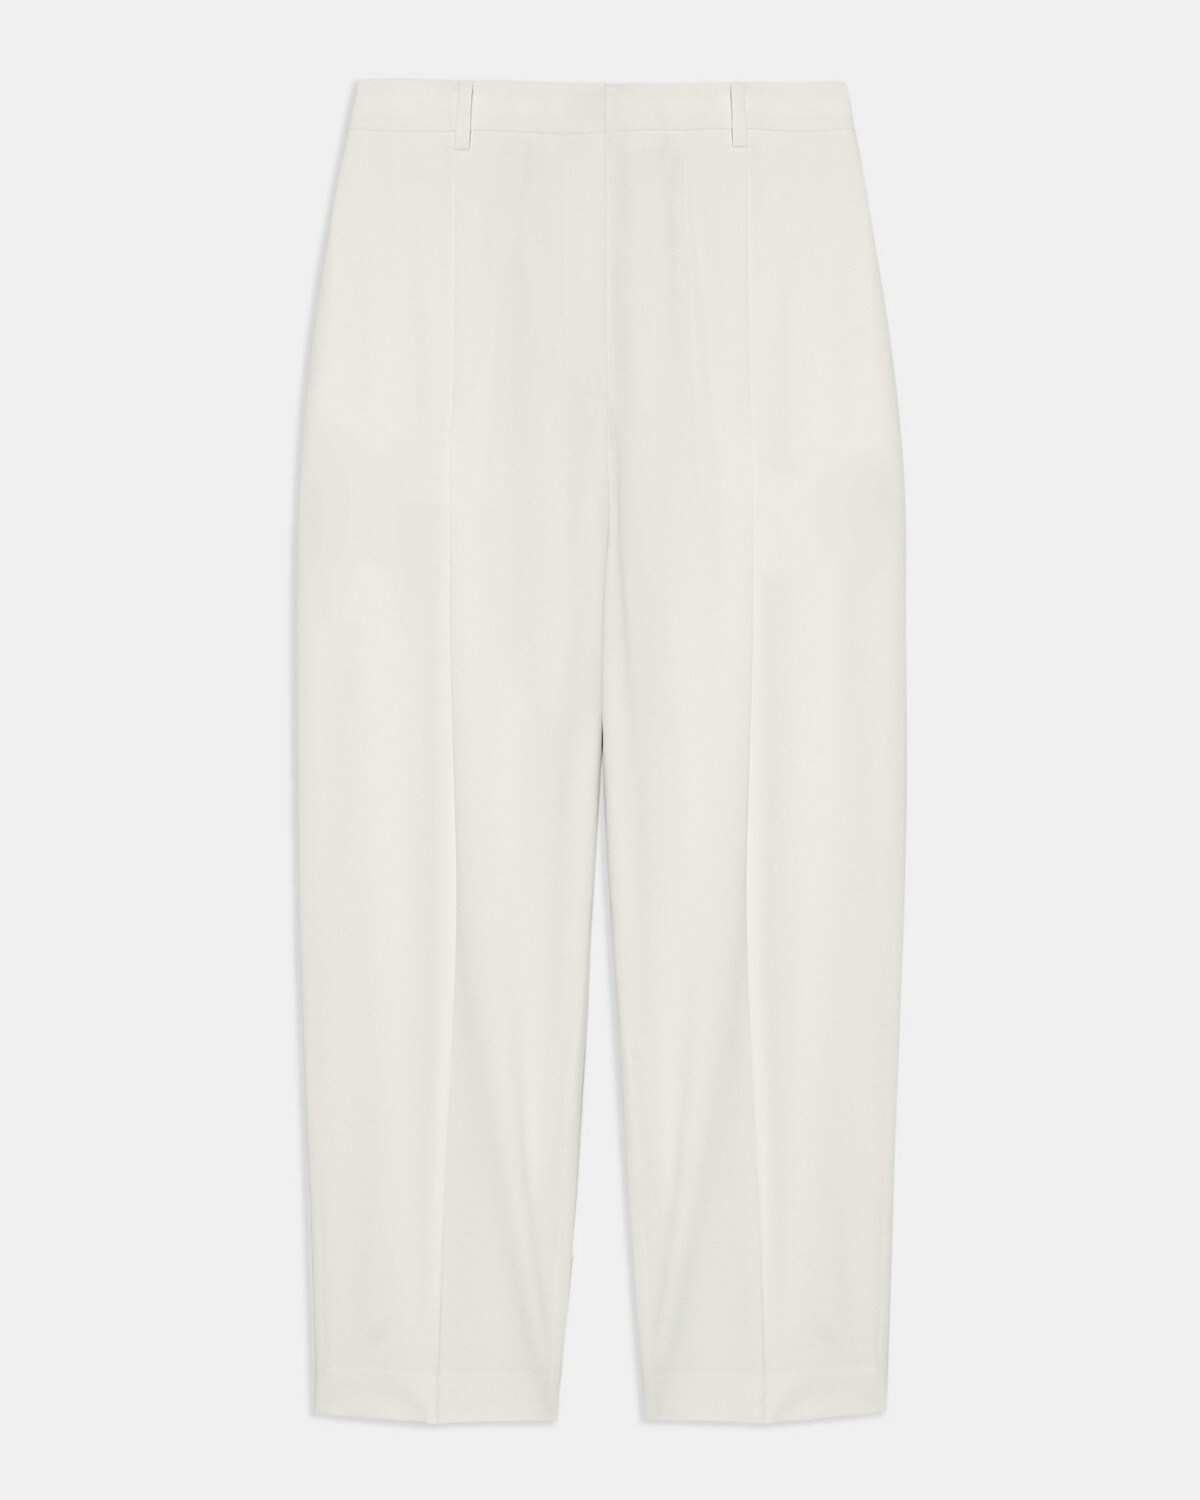 Pleated Carrot Pant in Good Wool